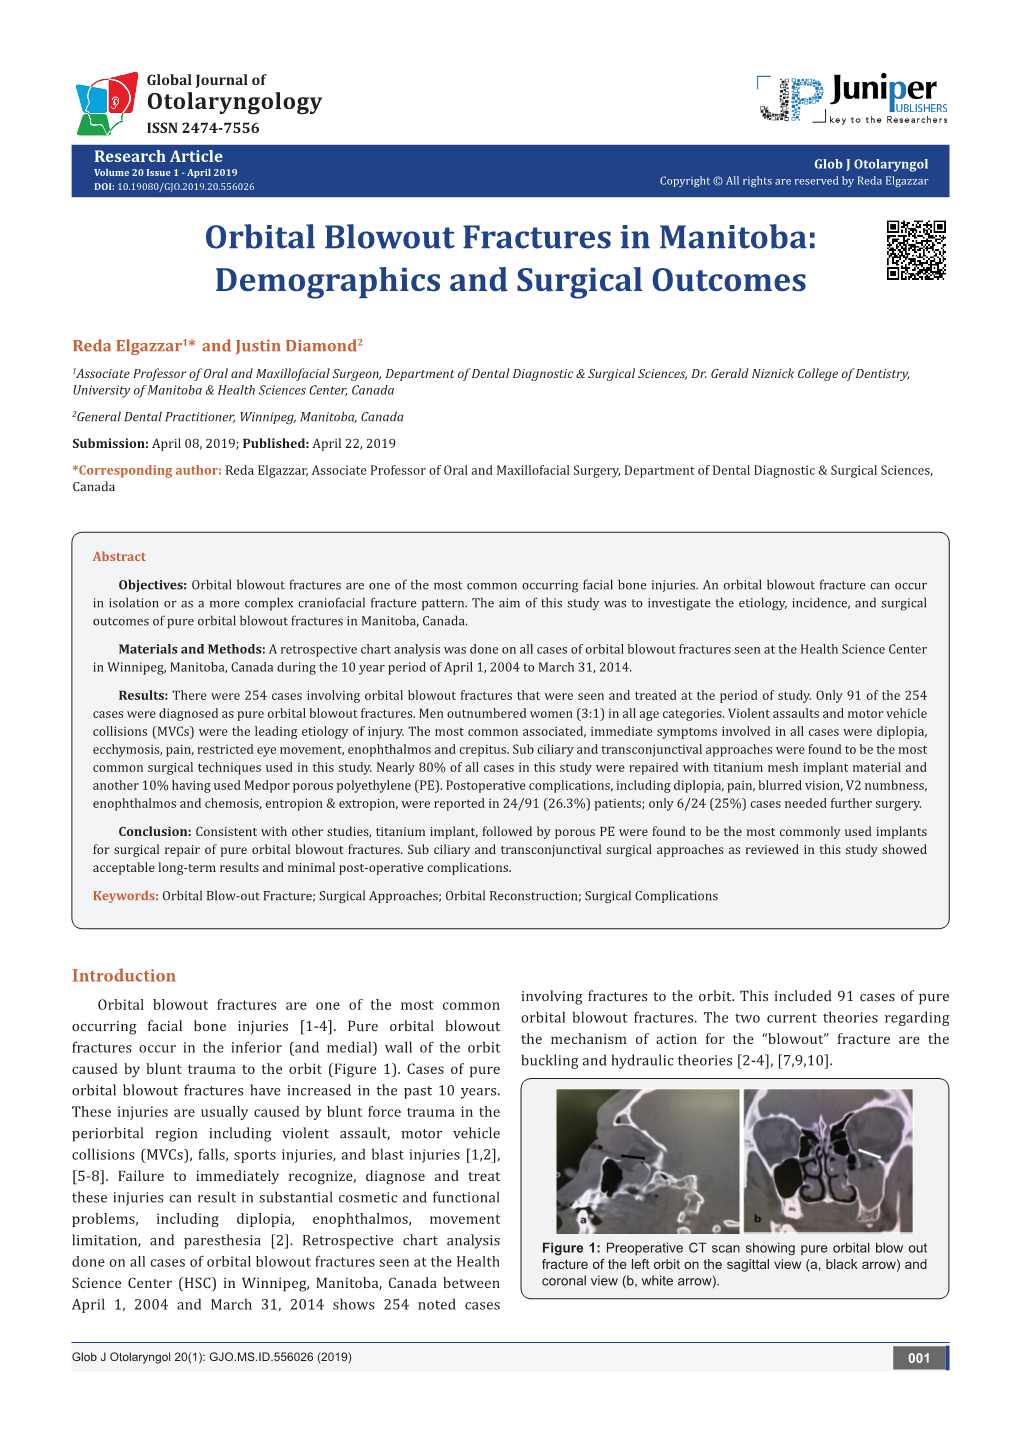 Orbital Blowout Fractures in Manitoba: Demographics and Surgical Outcomes